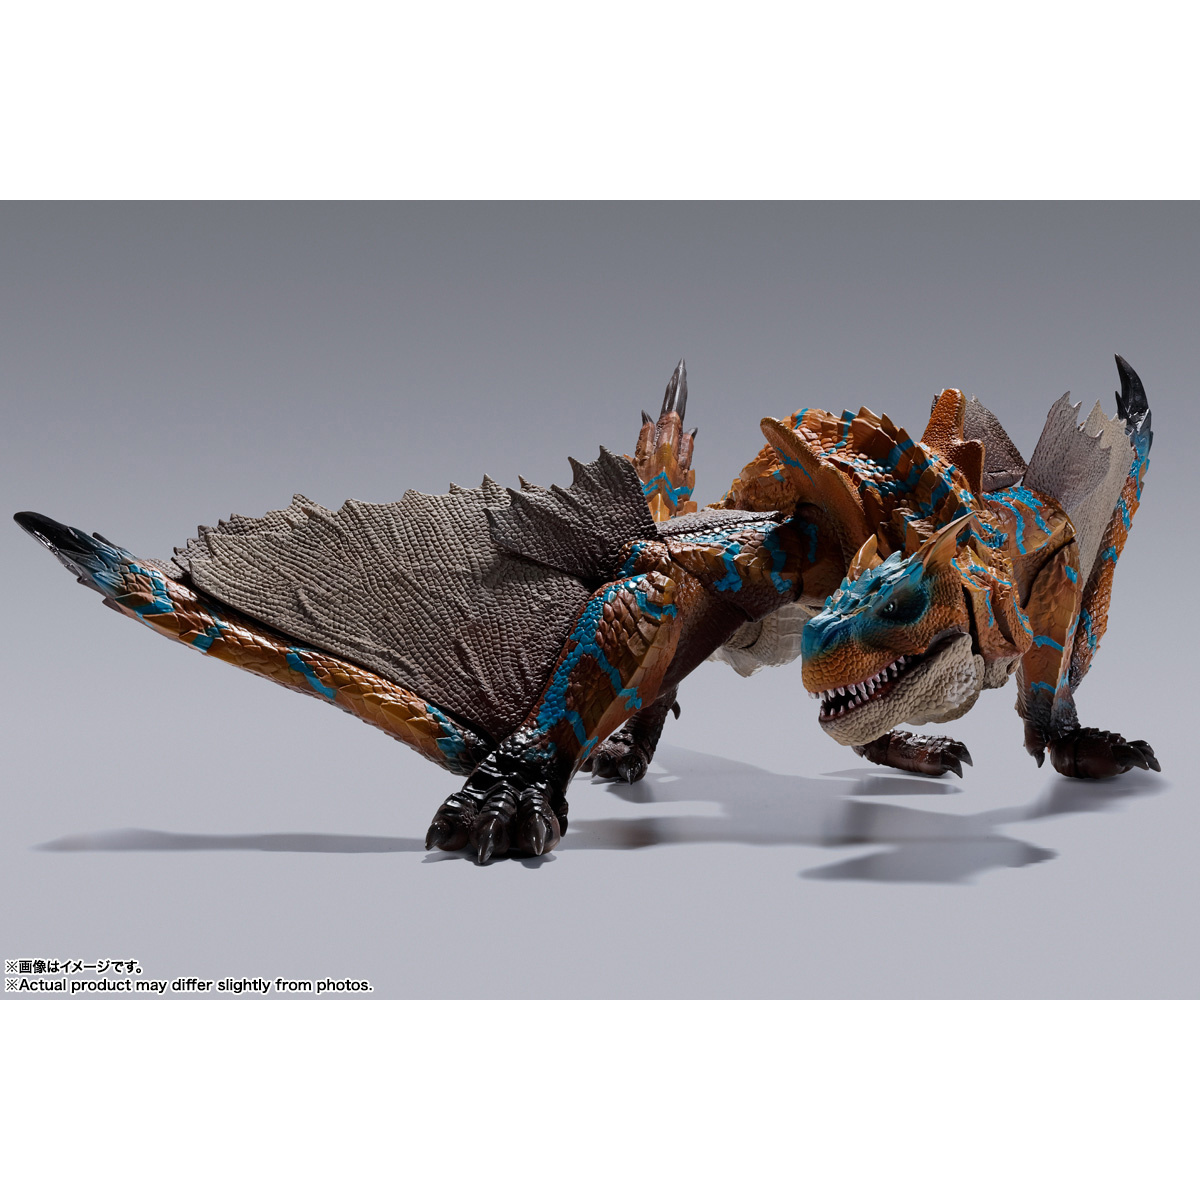 Monster Hunter S.H.Monster Arts "Tigrex"-Tamashii-Ace Cards & Collectibles